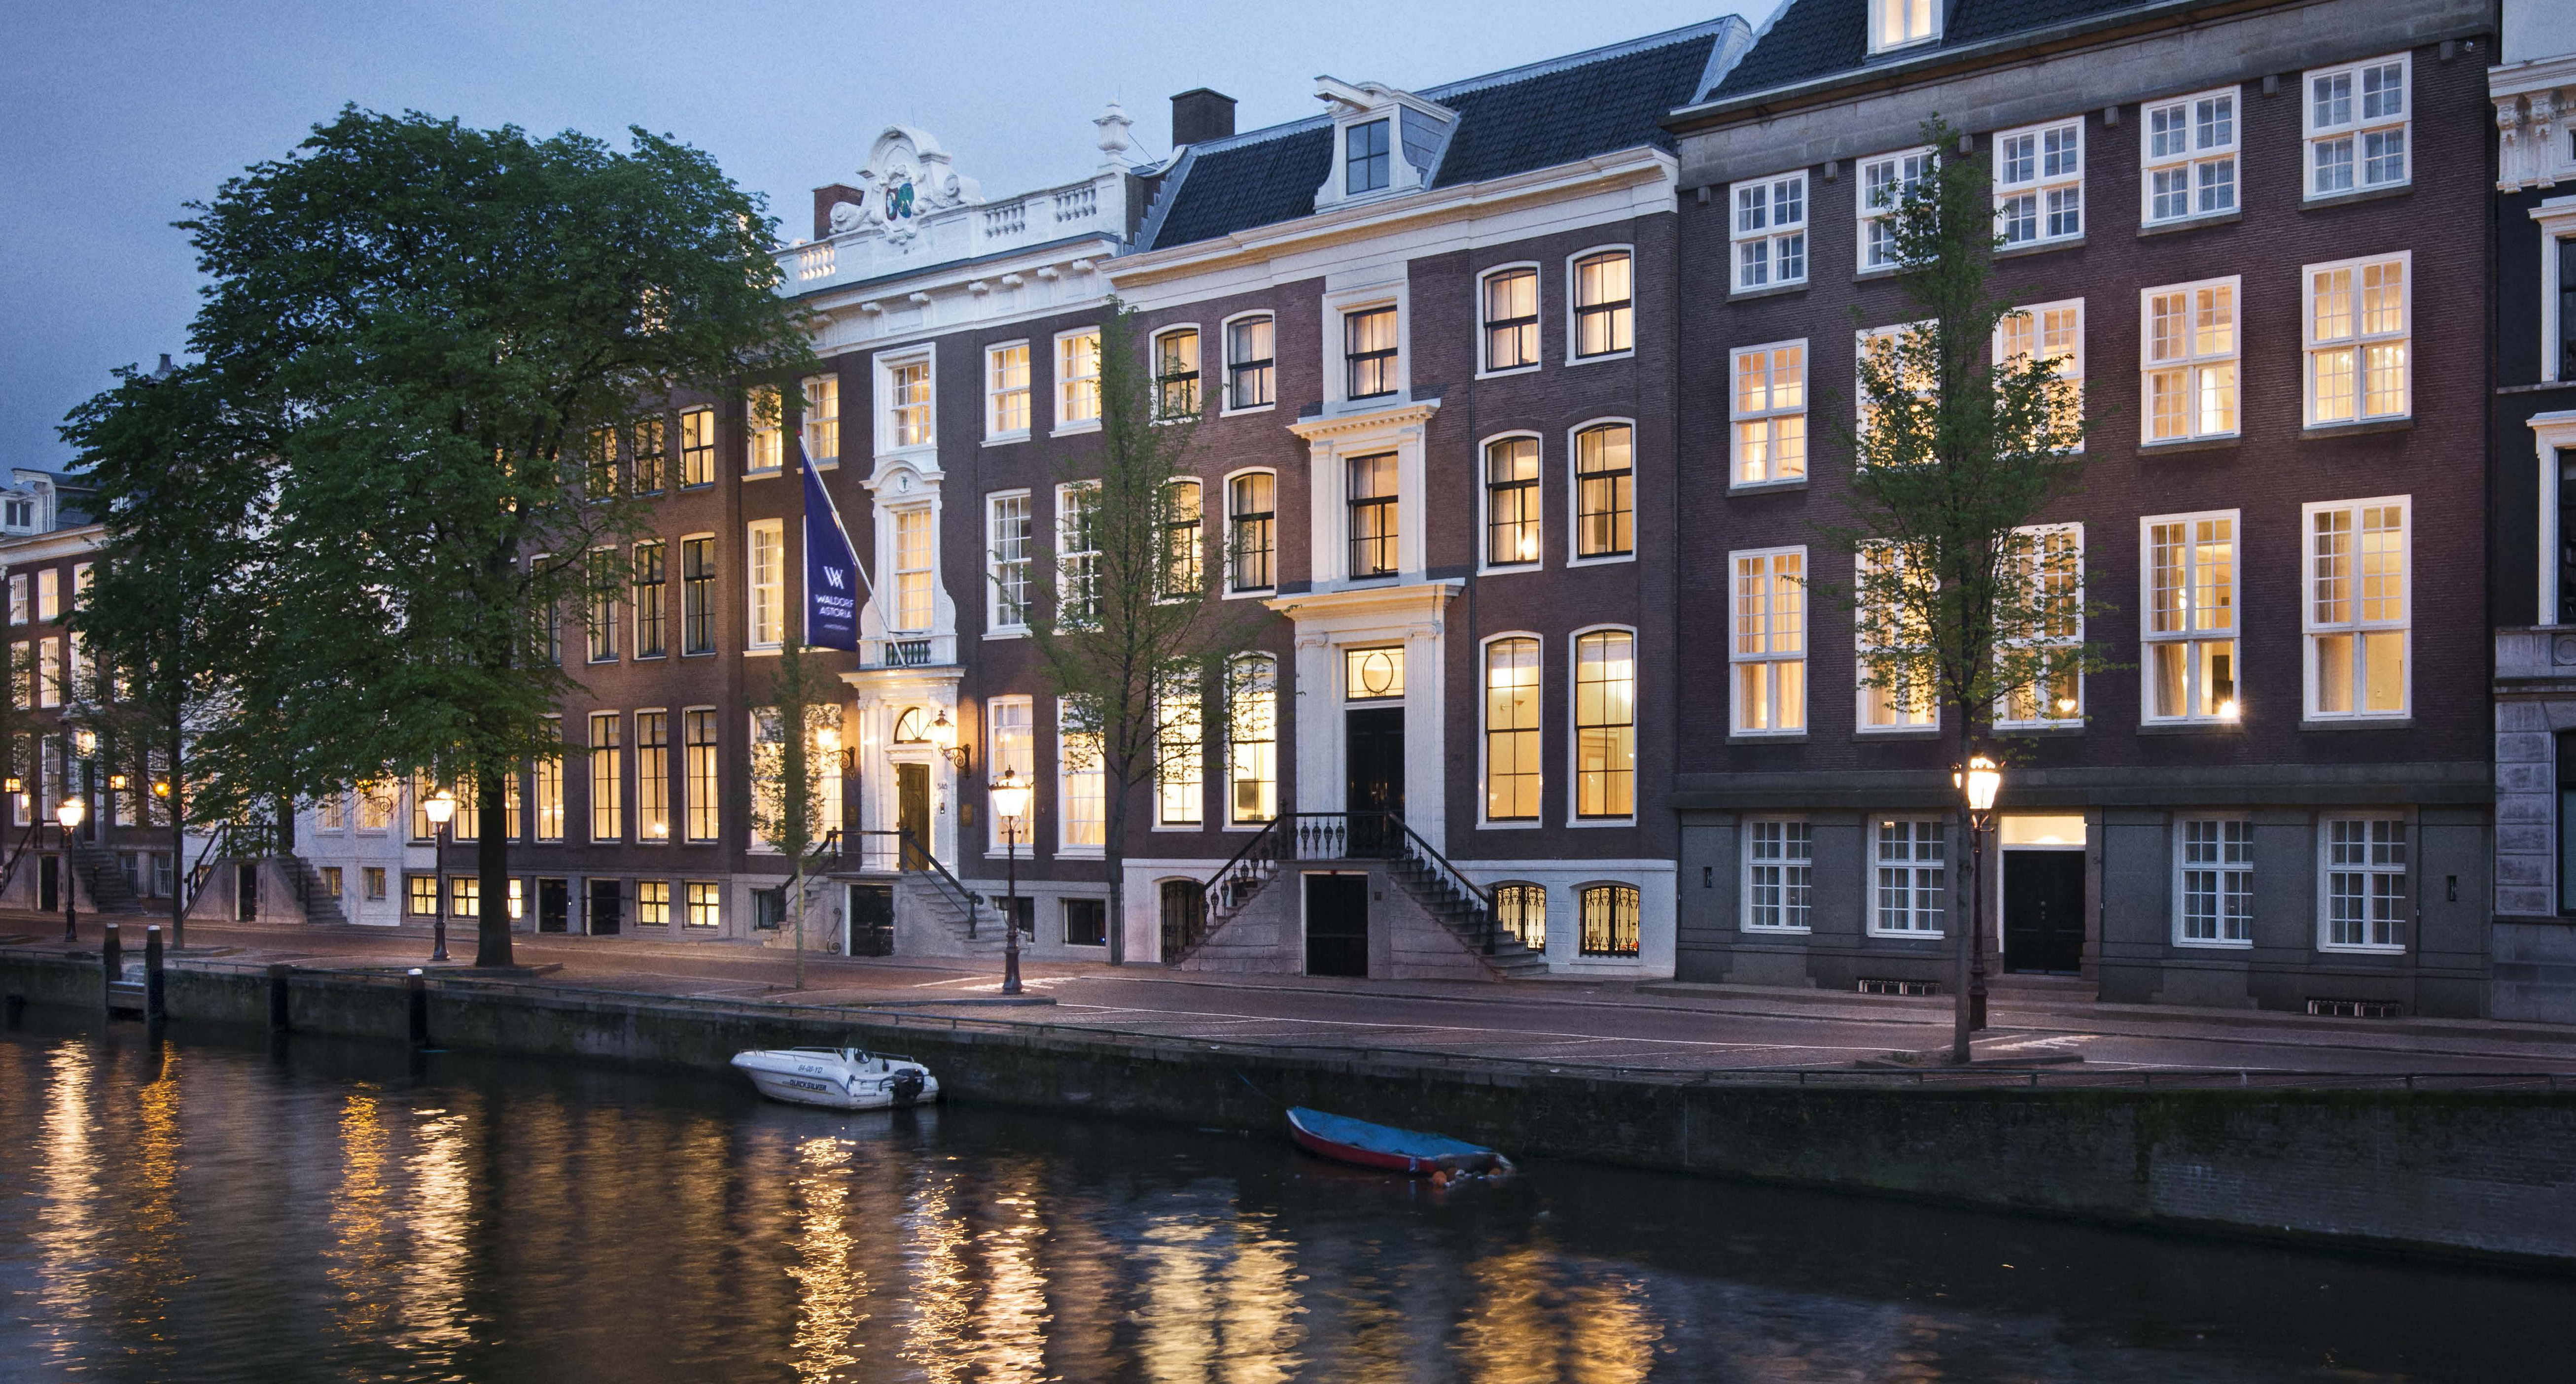 11 Architecture Adaptive Re Use COMMENDED WaldorfAstoriaAmsterdam